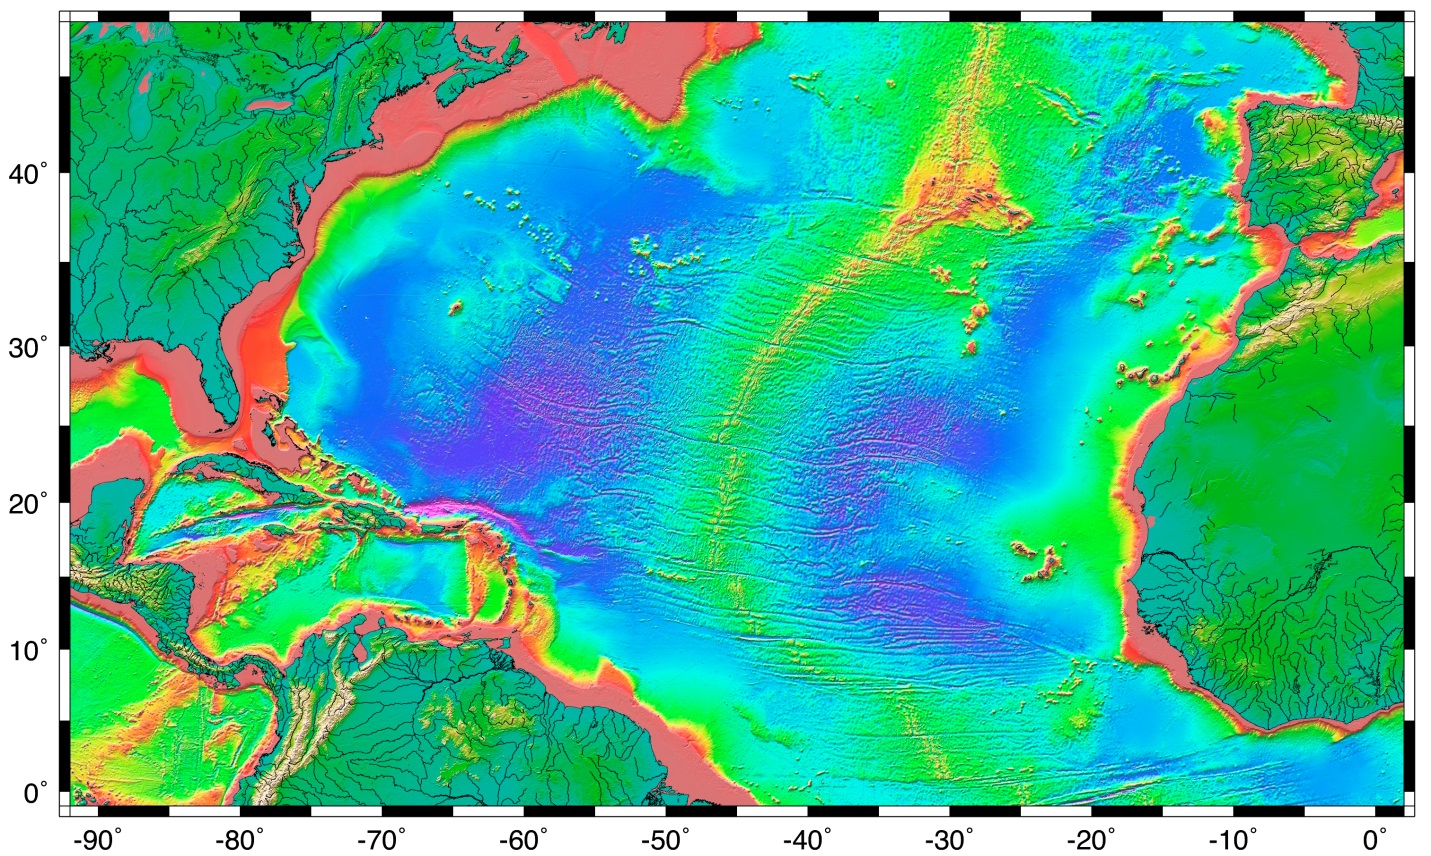 Figure shows the difference in topography by depth. Zones that are close to the continents have bands that are less than 2,000 meters deep. Zones outwards from these area have depths that vary between 3,000 and 5,000 meters. Zones that are near trenches (there is a small one northeast of the Caribbean Islands) exceed 6,000 meters.